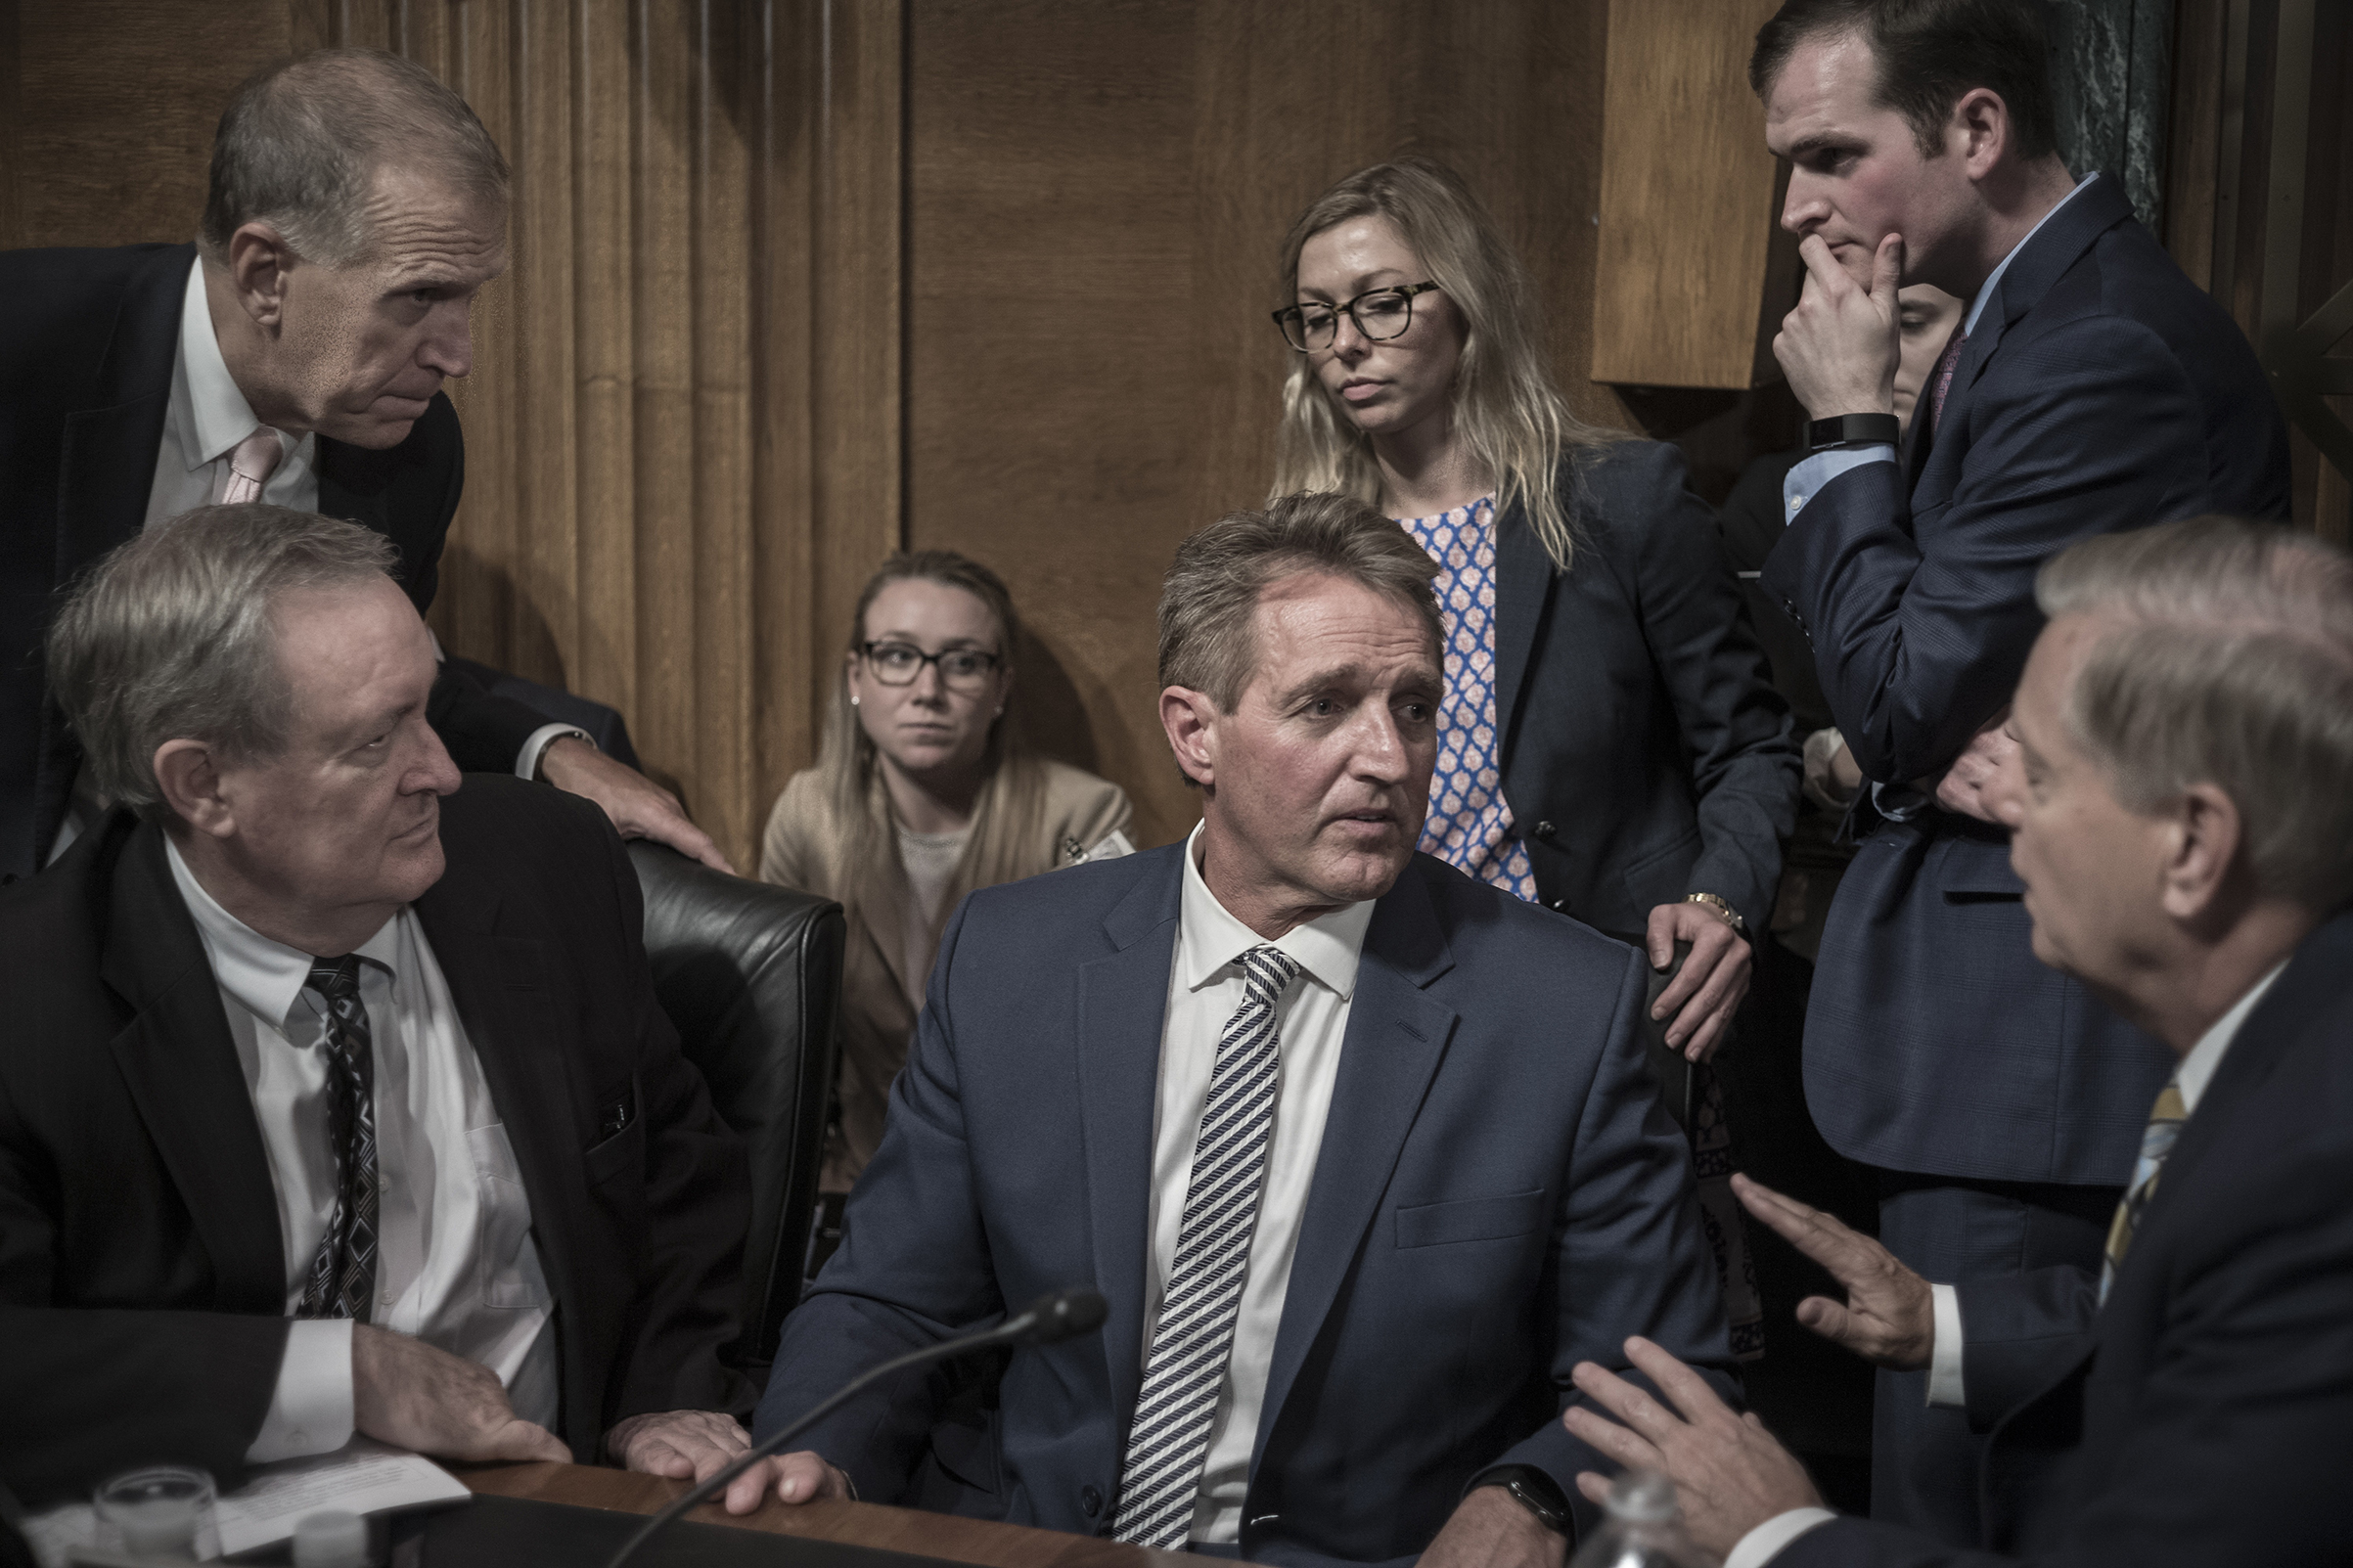 GOP Senators surround Senator Jeff Flake, who slowed Kavanaugh’s confirmation after Ford testified (David Butow—Redux for TIME)